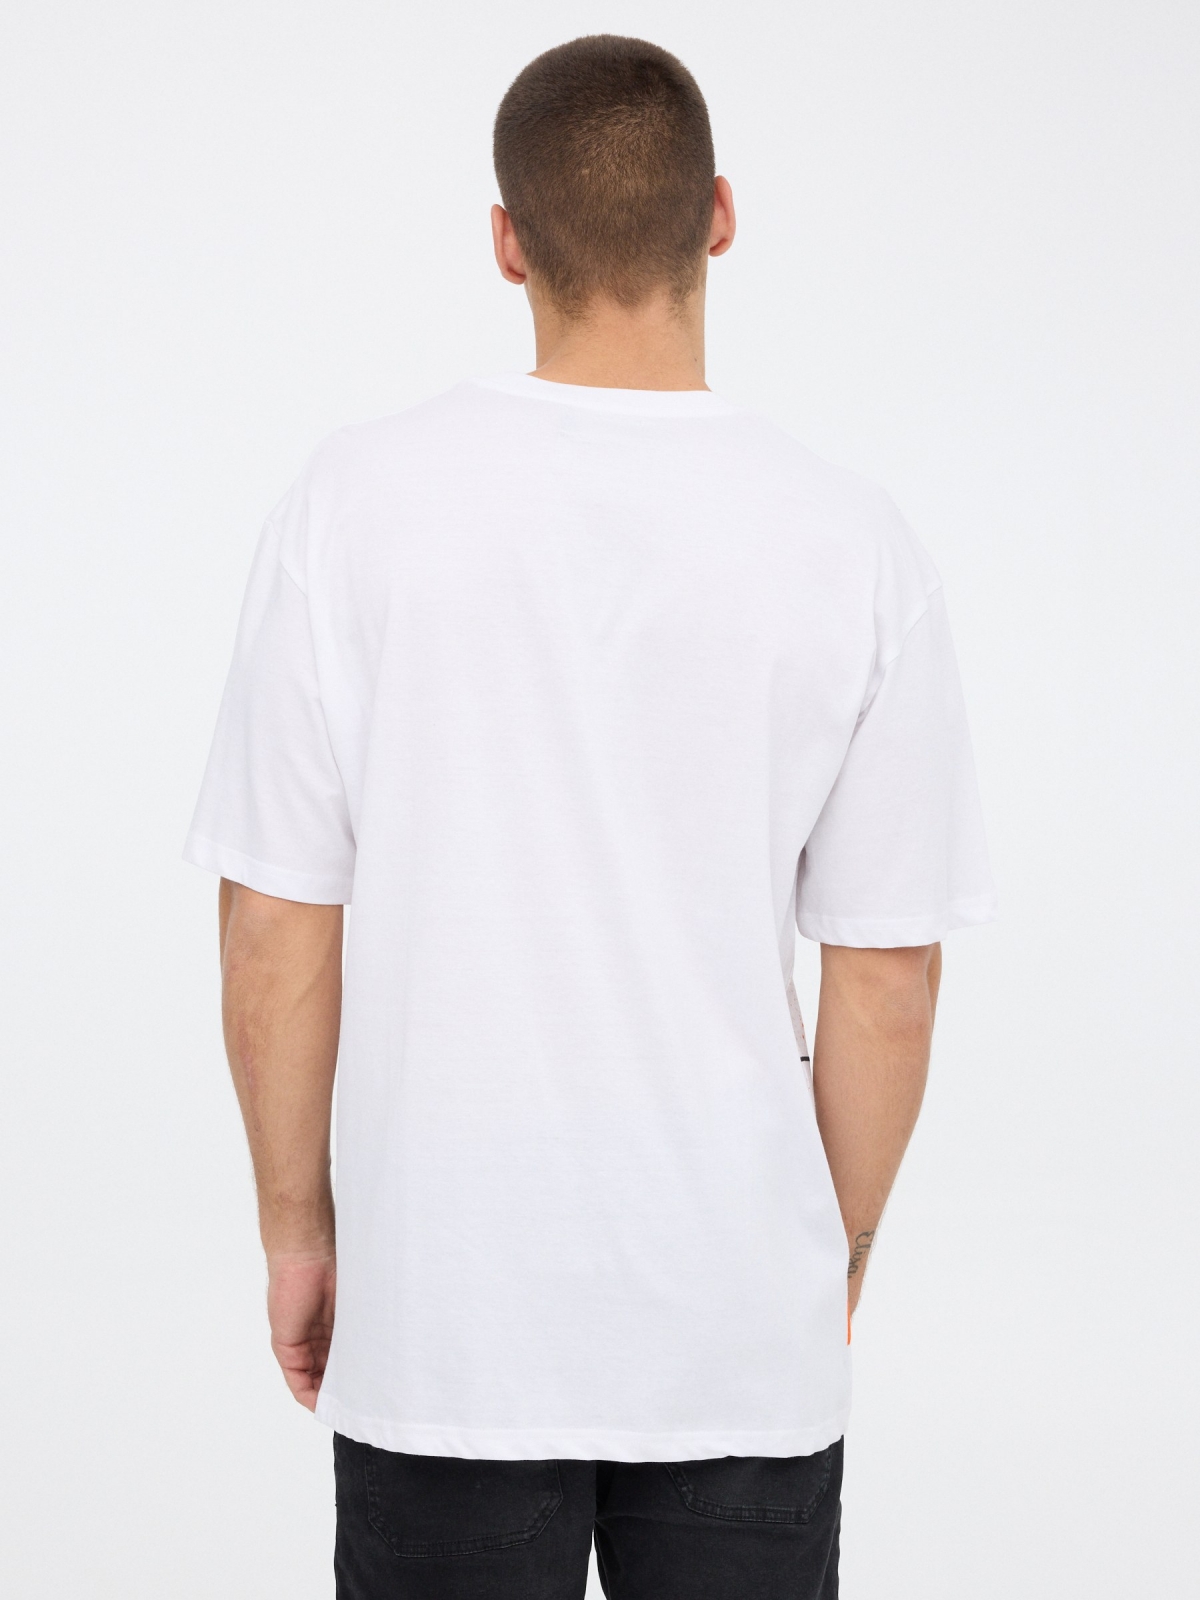 Skull printed t-shirt white middle back view